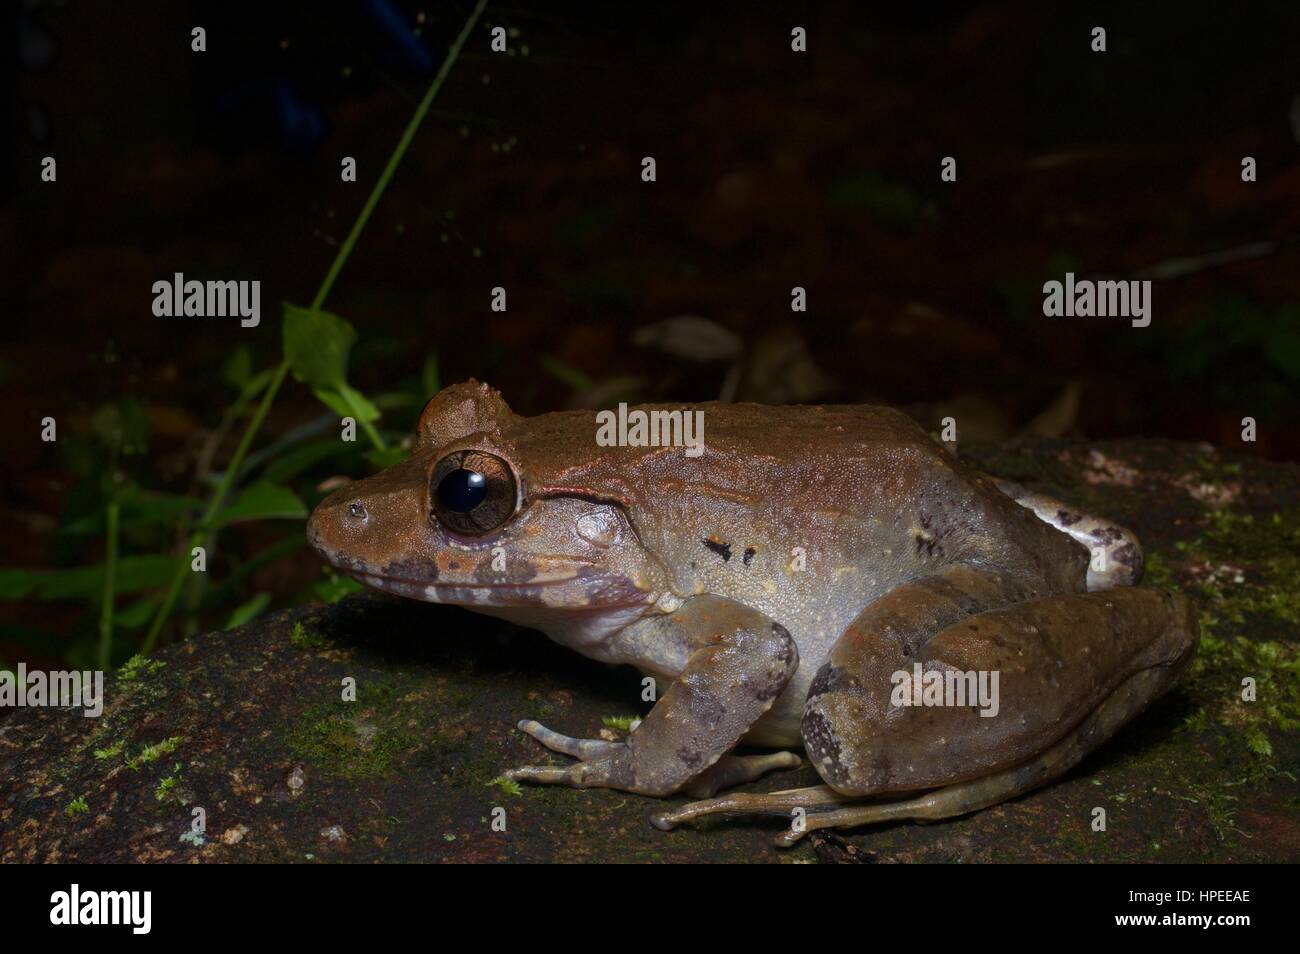 A Malesian Frog (Limnonectes malesianus) in the rainforest at night in Fraser's Hill, Pahang, Malaysia Stock Photo